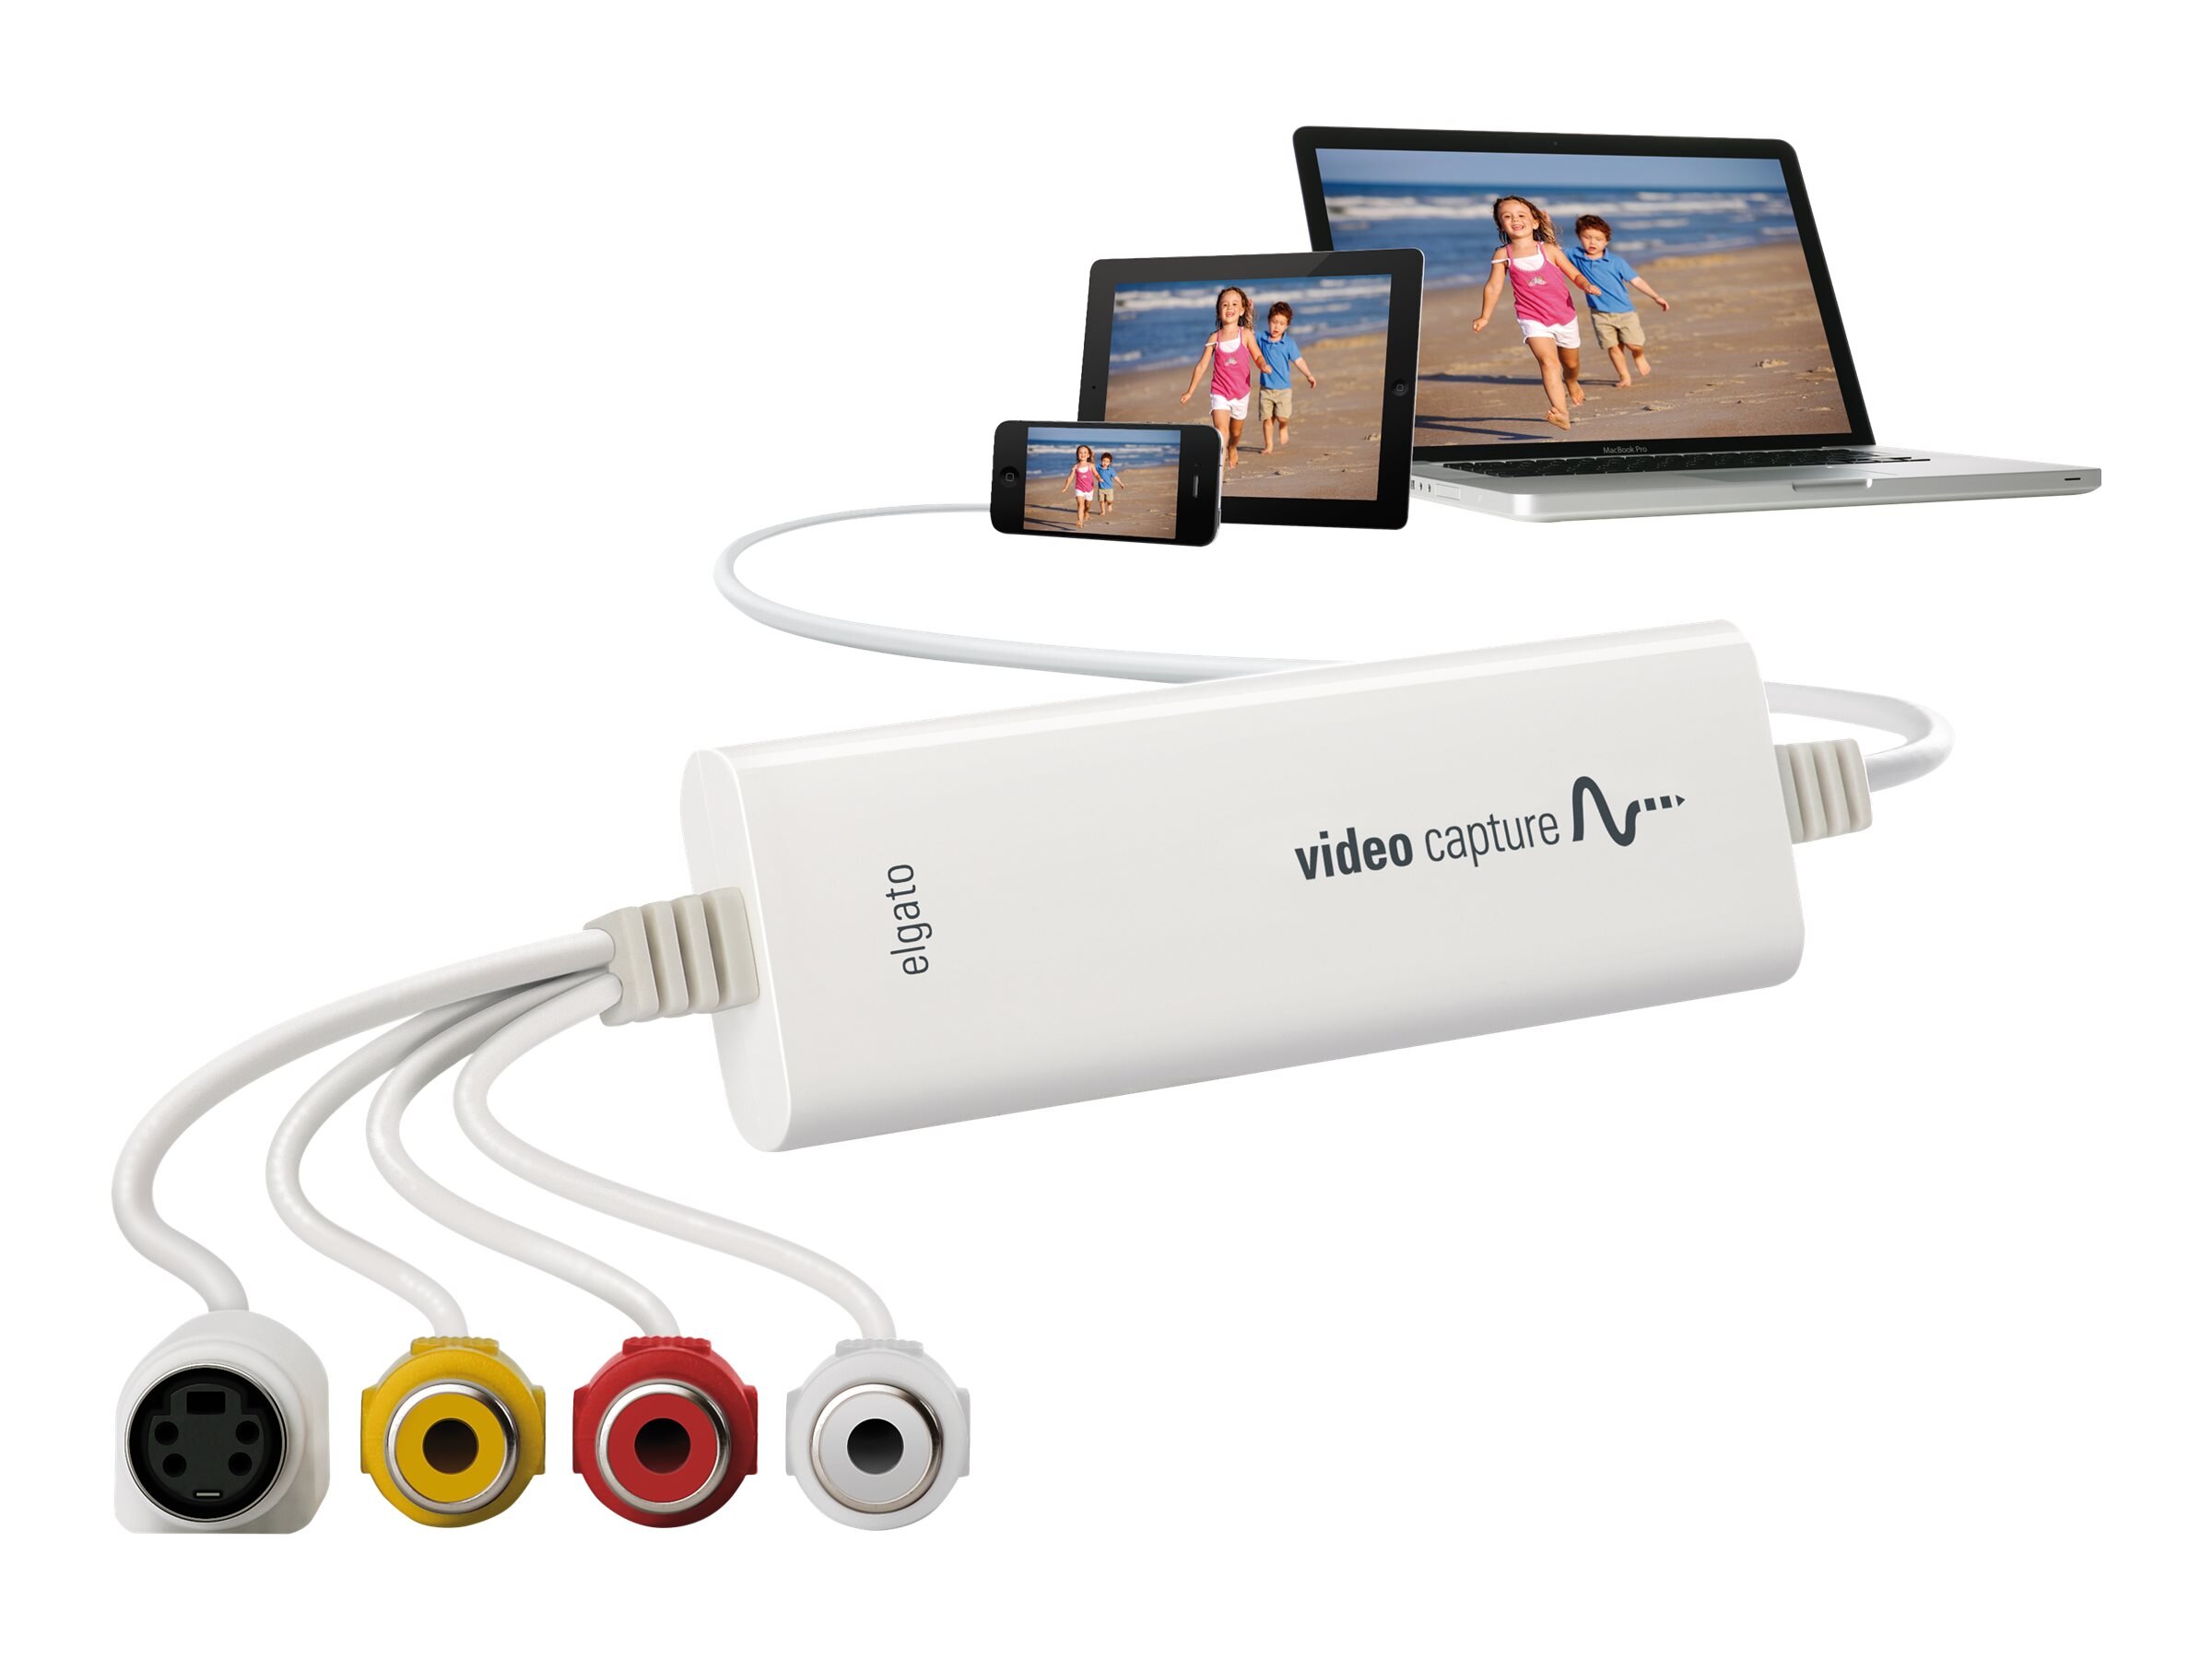 Elgato VIDEO CAPTURE DIGITISE VIDEO FROM A VCR